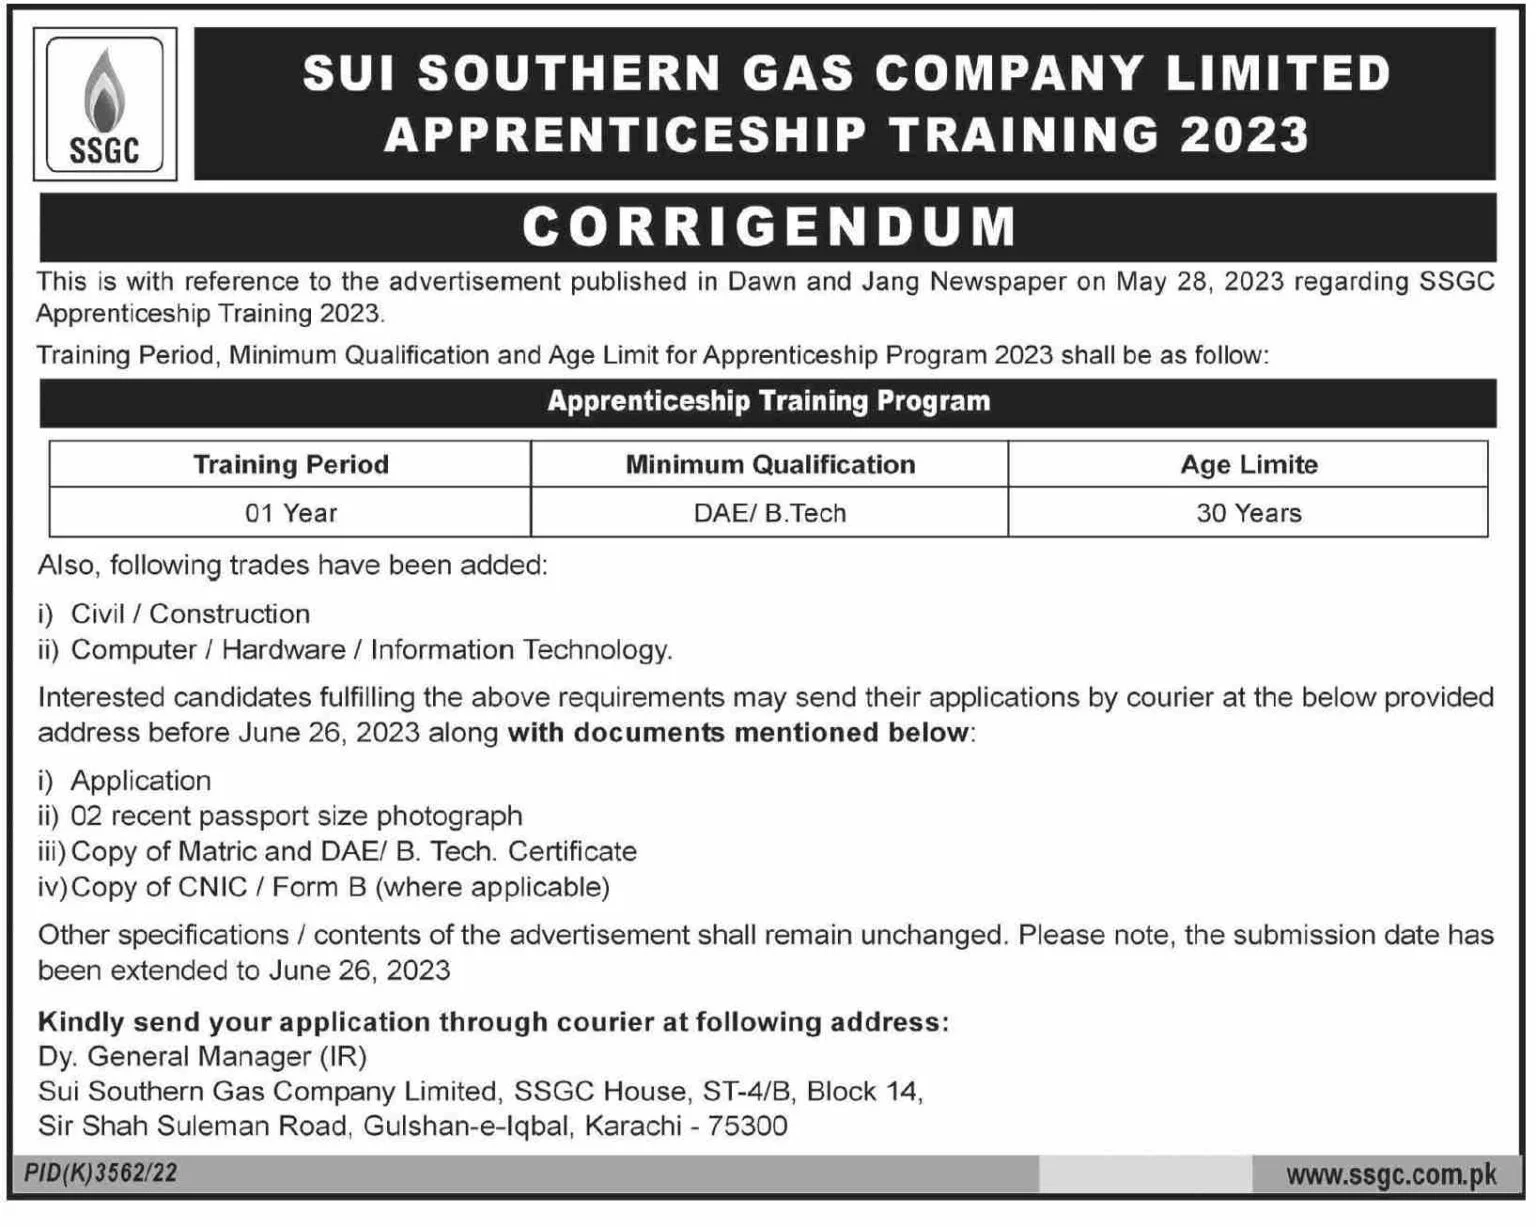 Sui Southern Gas Company Limited SSGC Jobs 2023